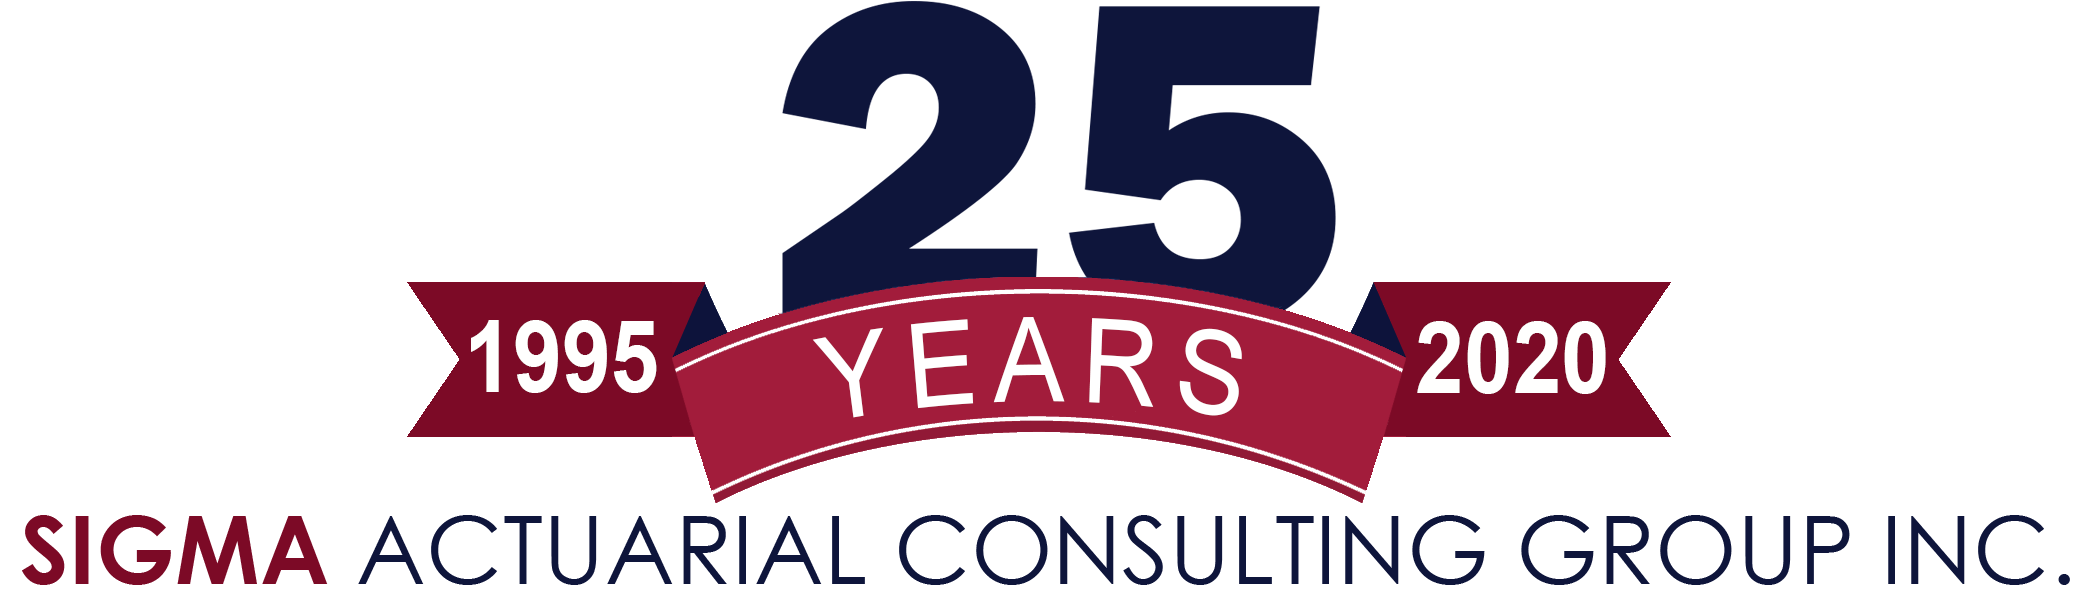 SIGMA Actuarial Consulting Group, Inc.